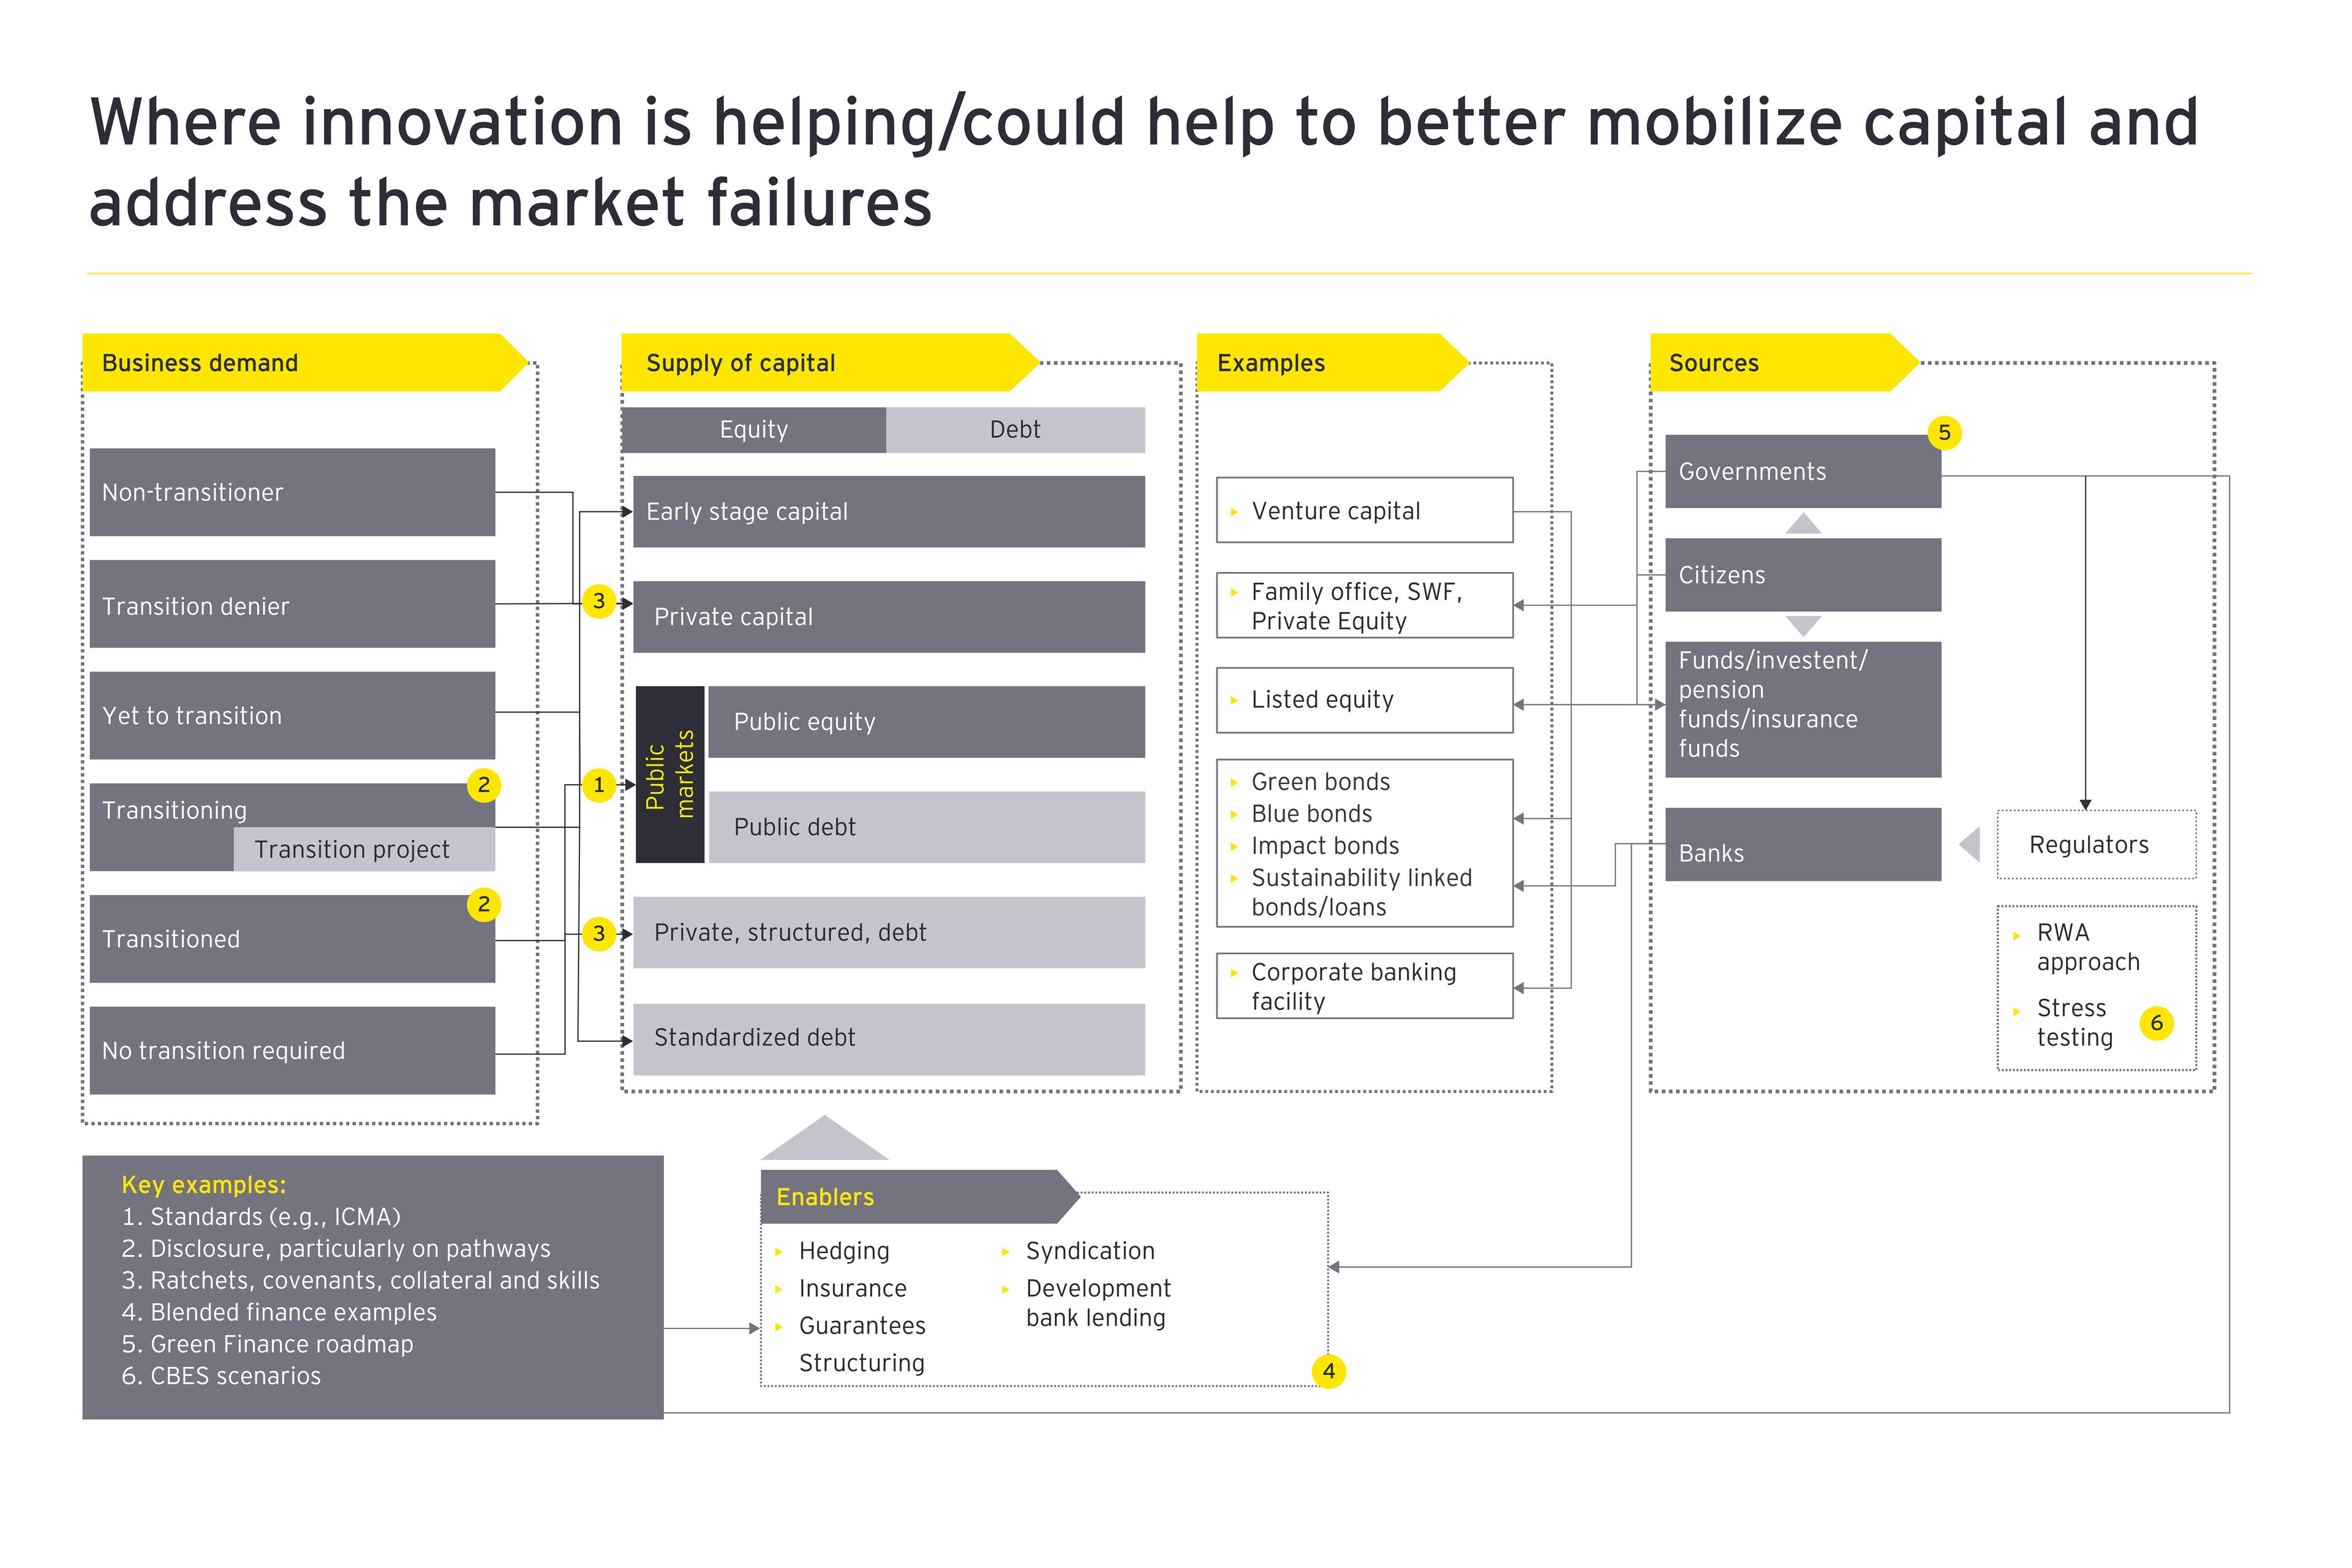 where innovation is helping to better mobilize capital and address market failures